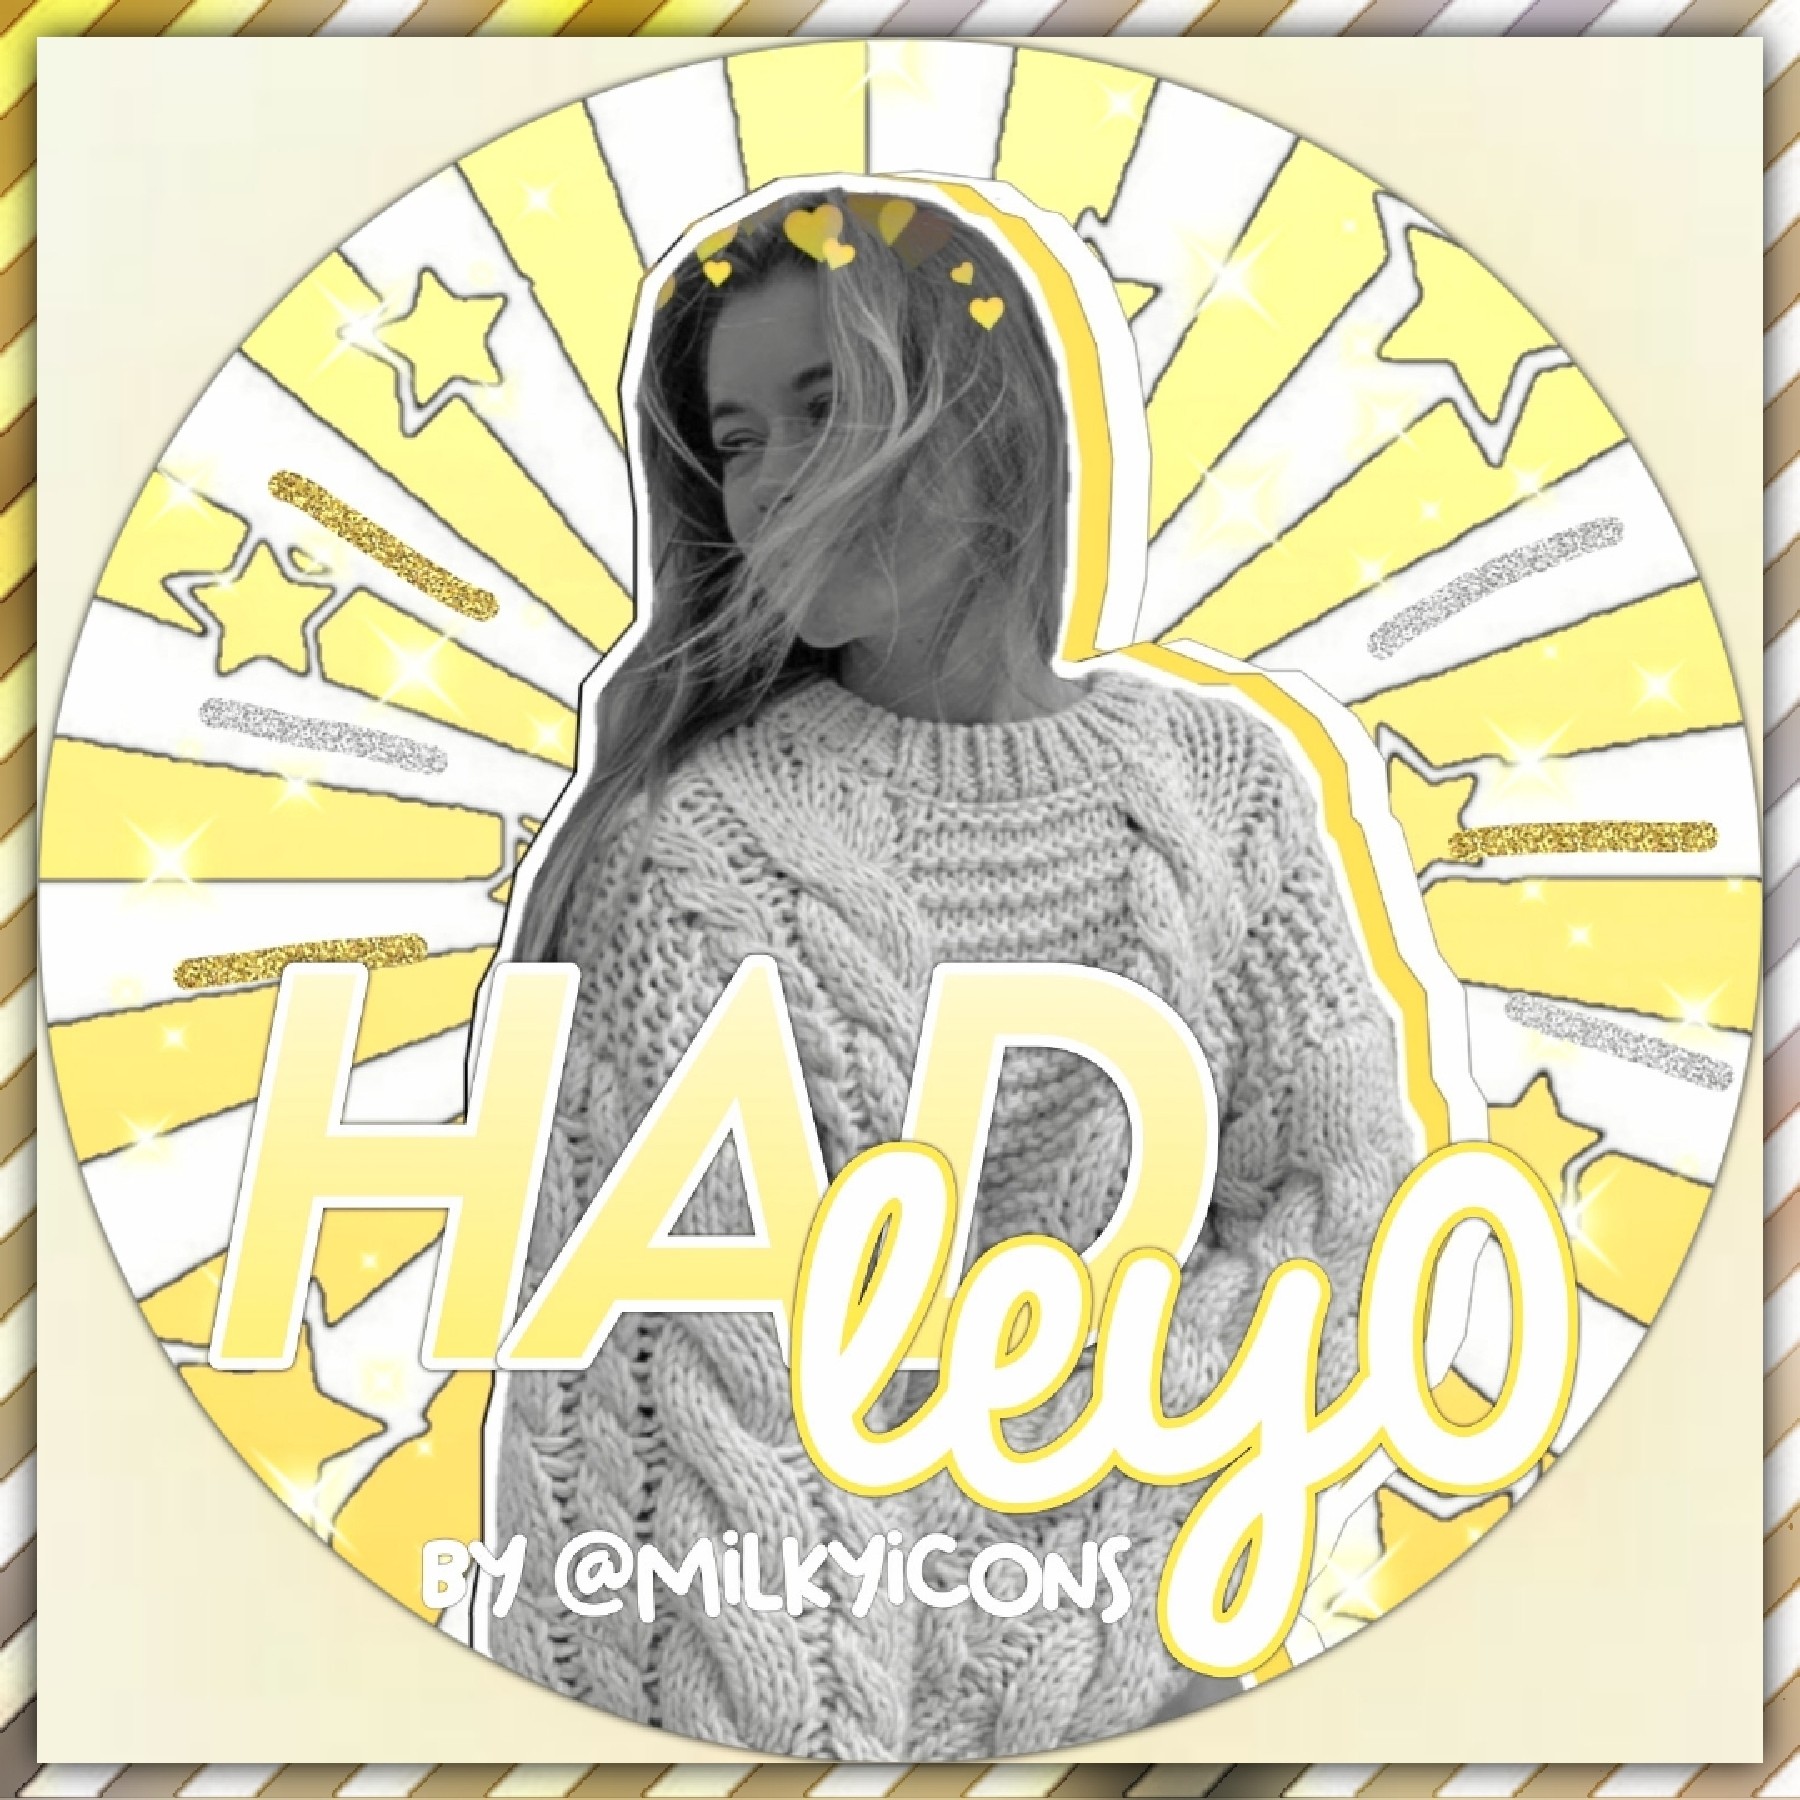 icon for: @Hadley0
style: simple
color: pale yellow💛
hope you like it! pls give credits if used 💗